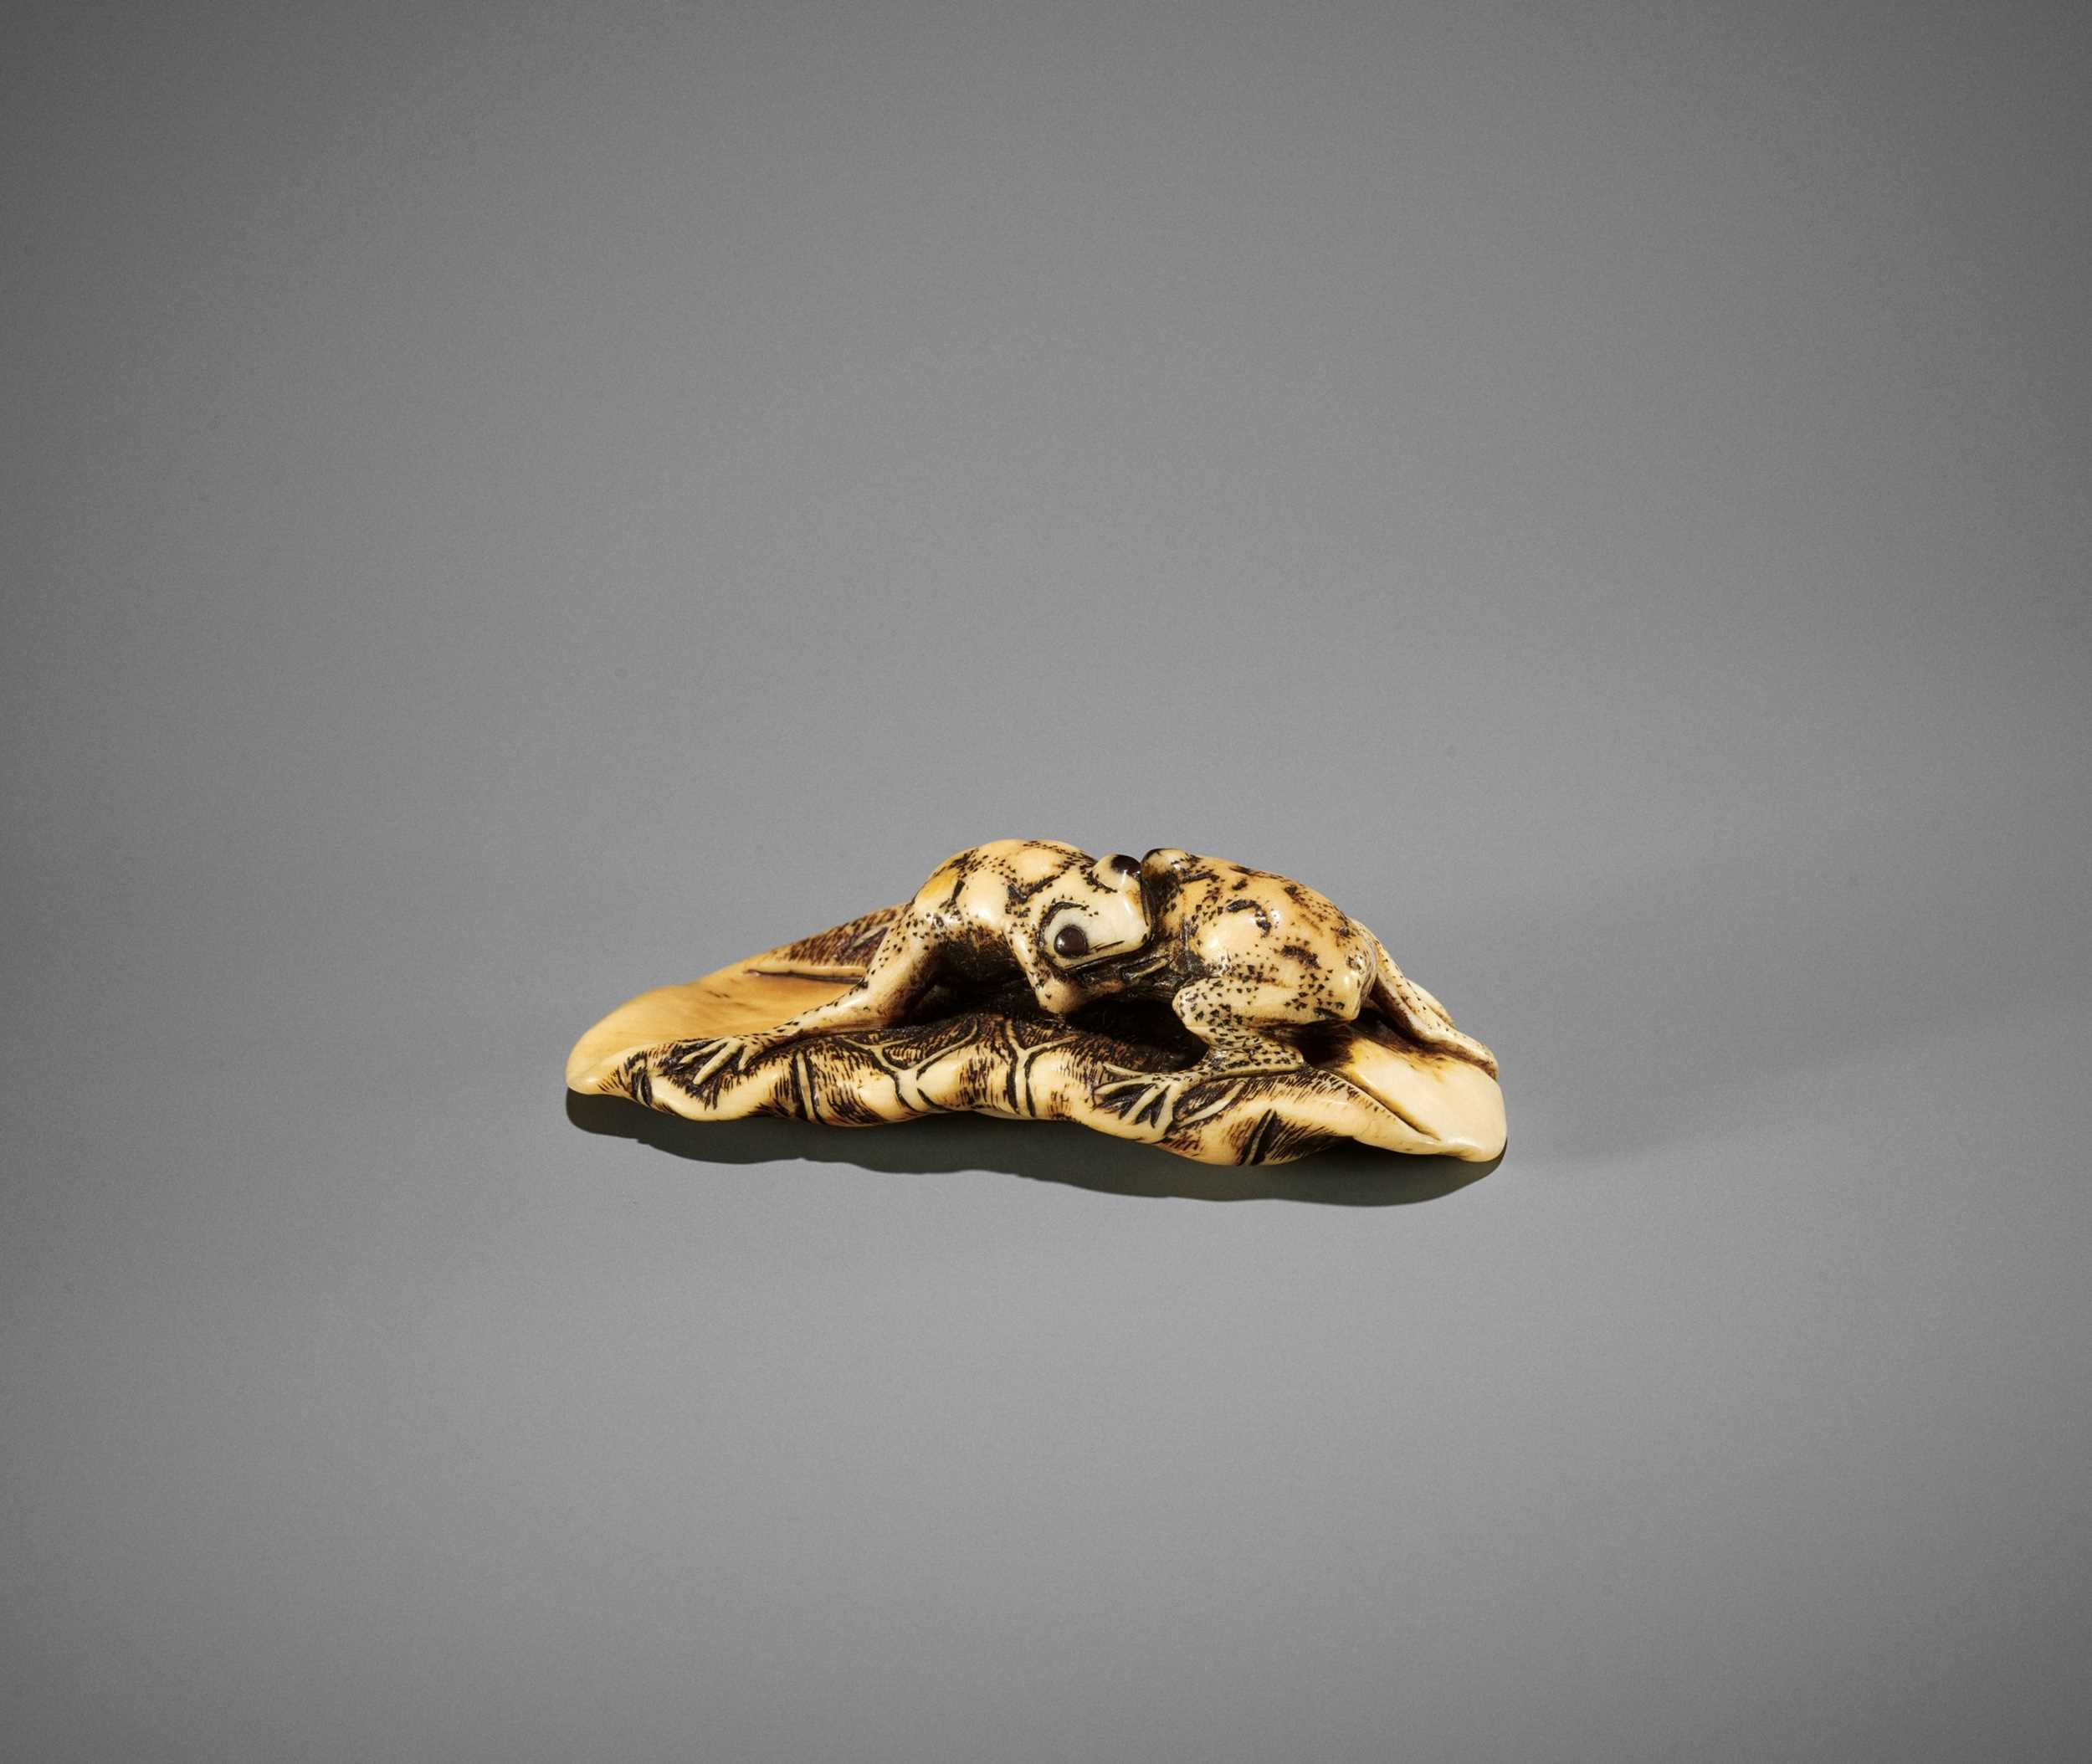 Lot 38 - YOSHITOMO: AN IVORY NETSUKE OF TWO FROGS WRESTLING ON A LOTUS LEAF